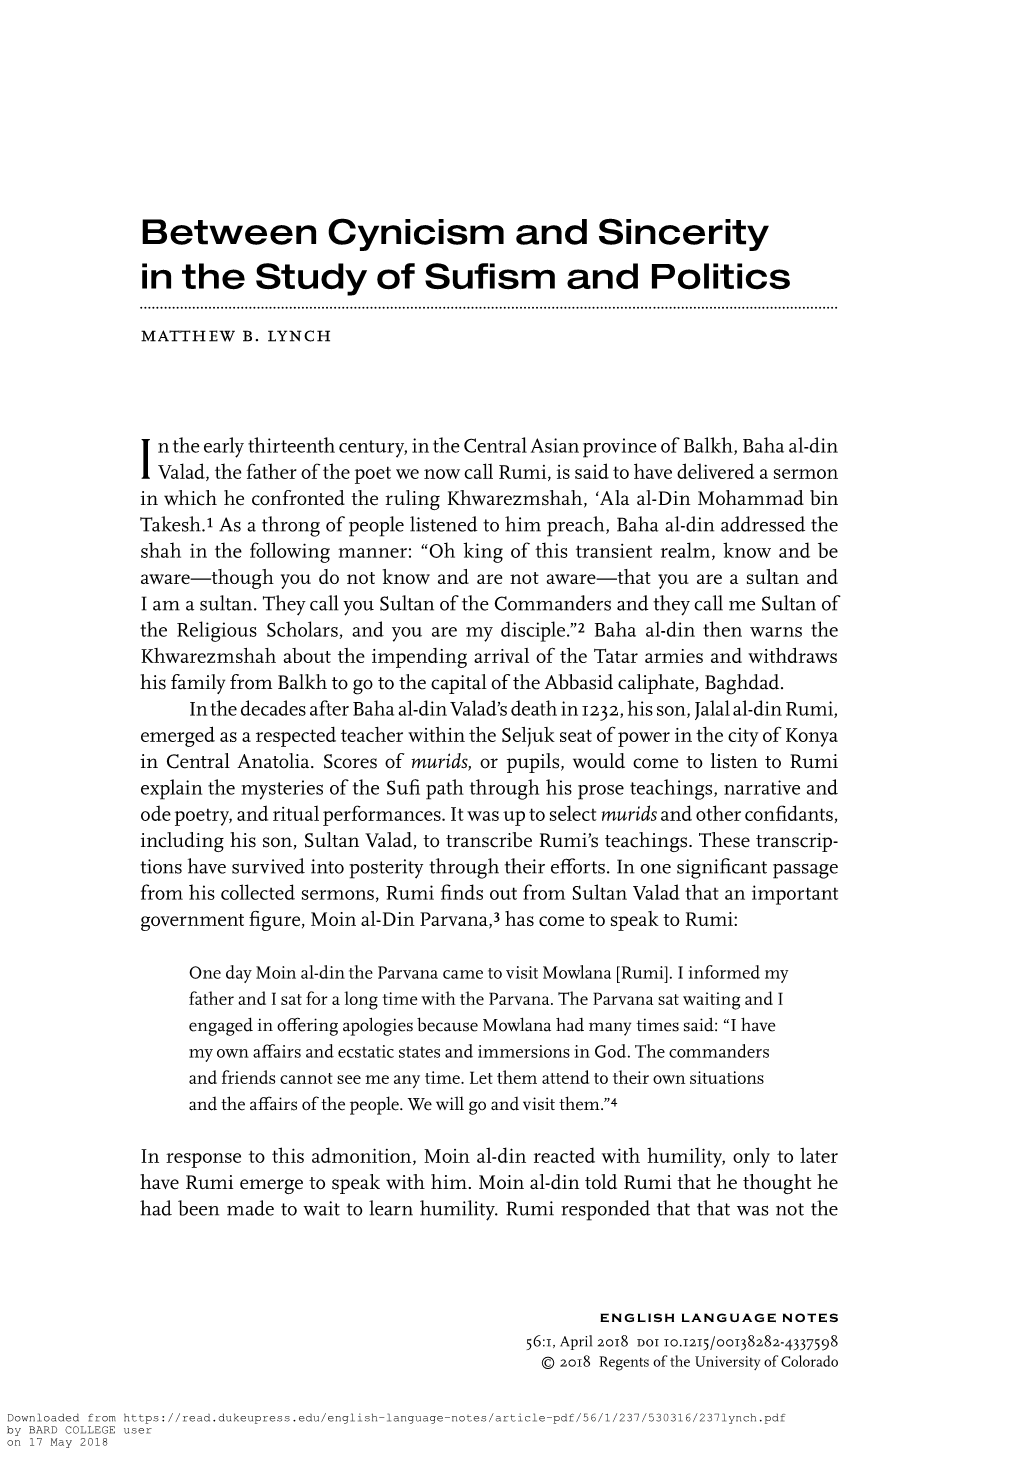 Between Cynicism and Sincerity in the Study of Sufism and Politics